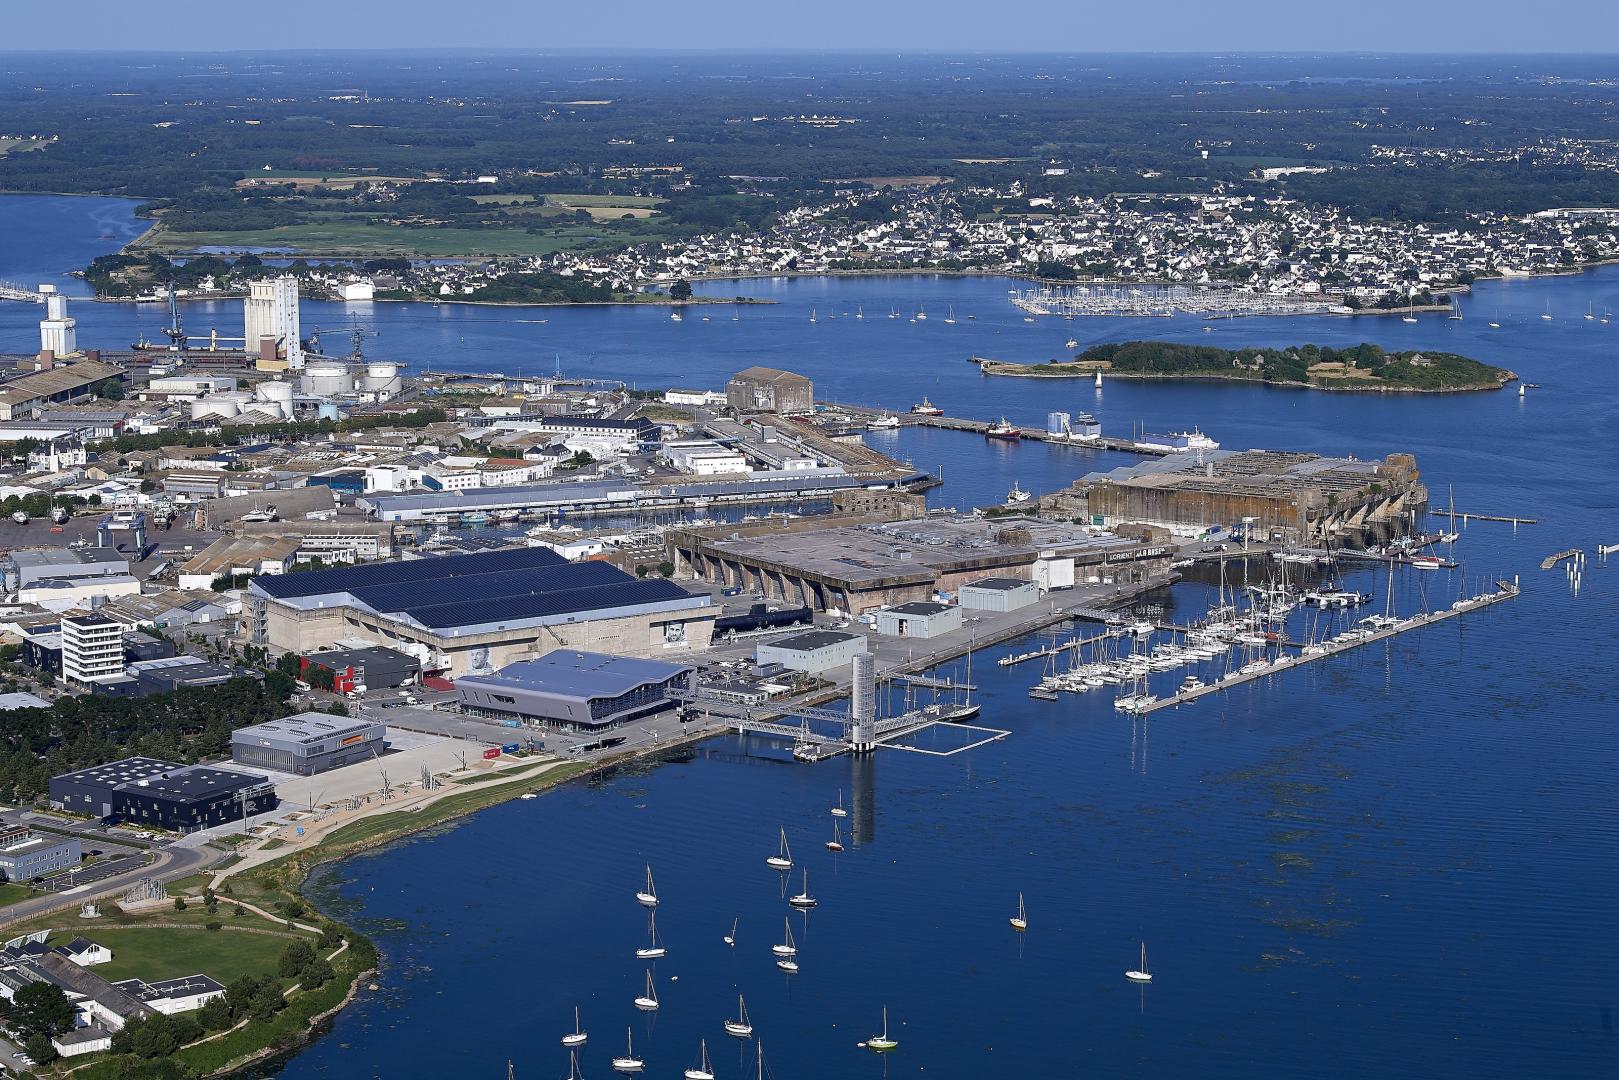 Lorient, France will host the start of The Ocean Race Europe